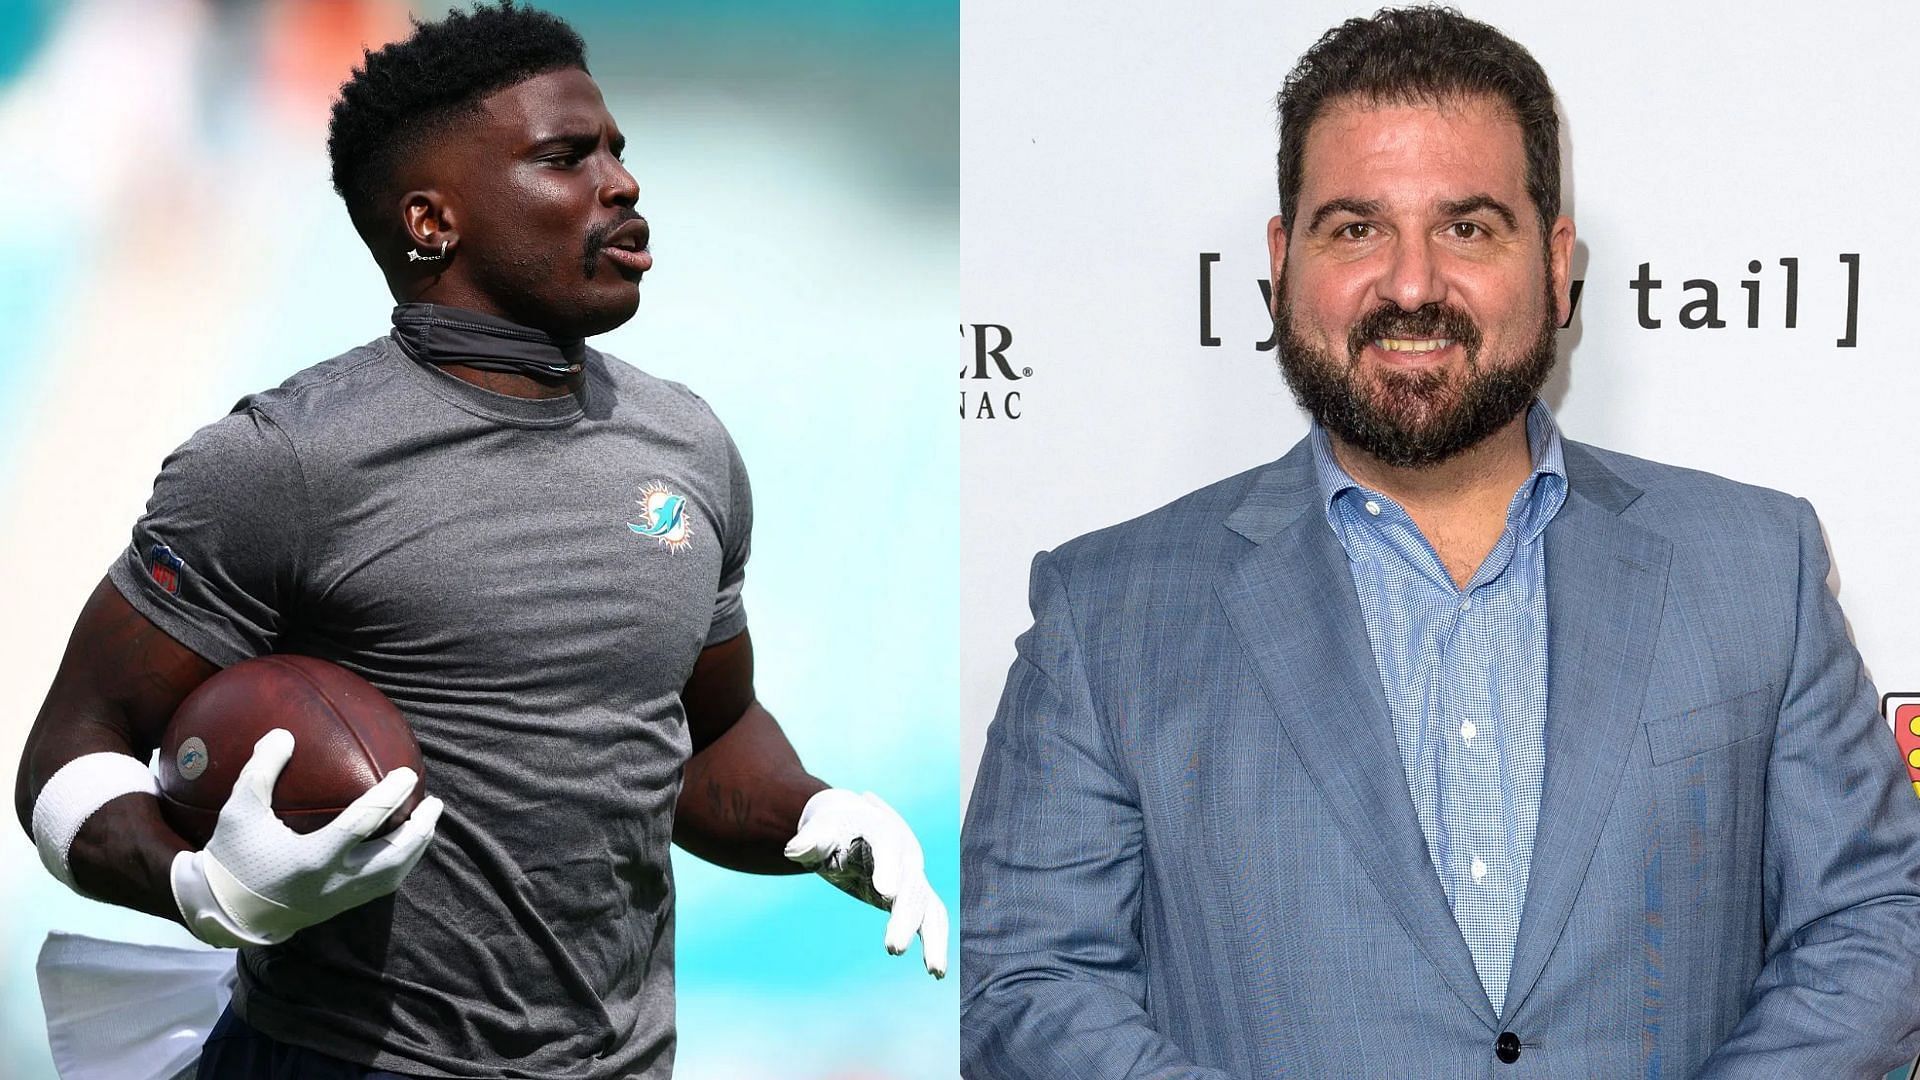 Miami Dolphins wide receiver Tyreek Hill and sports show host Dan Le Batard (Image credit: Jason Koerner/Getty Images)